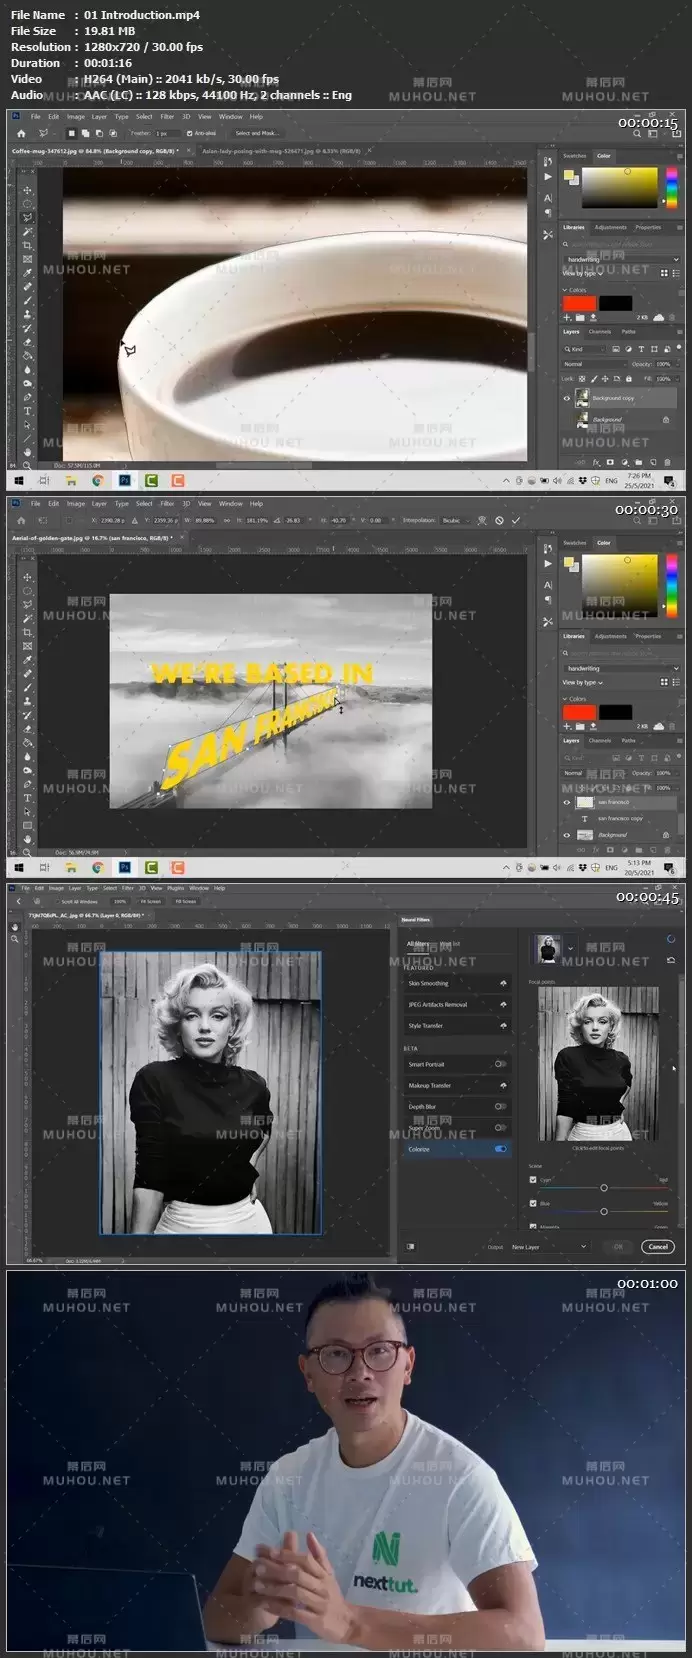 Photoshop初学者基础知识课程视频教程（英文）Adobe Photoshop 2021 for Small Business Owner插图1